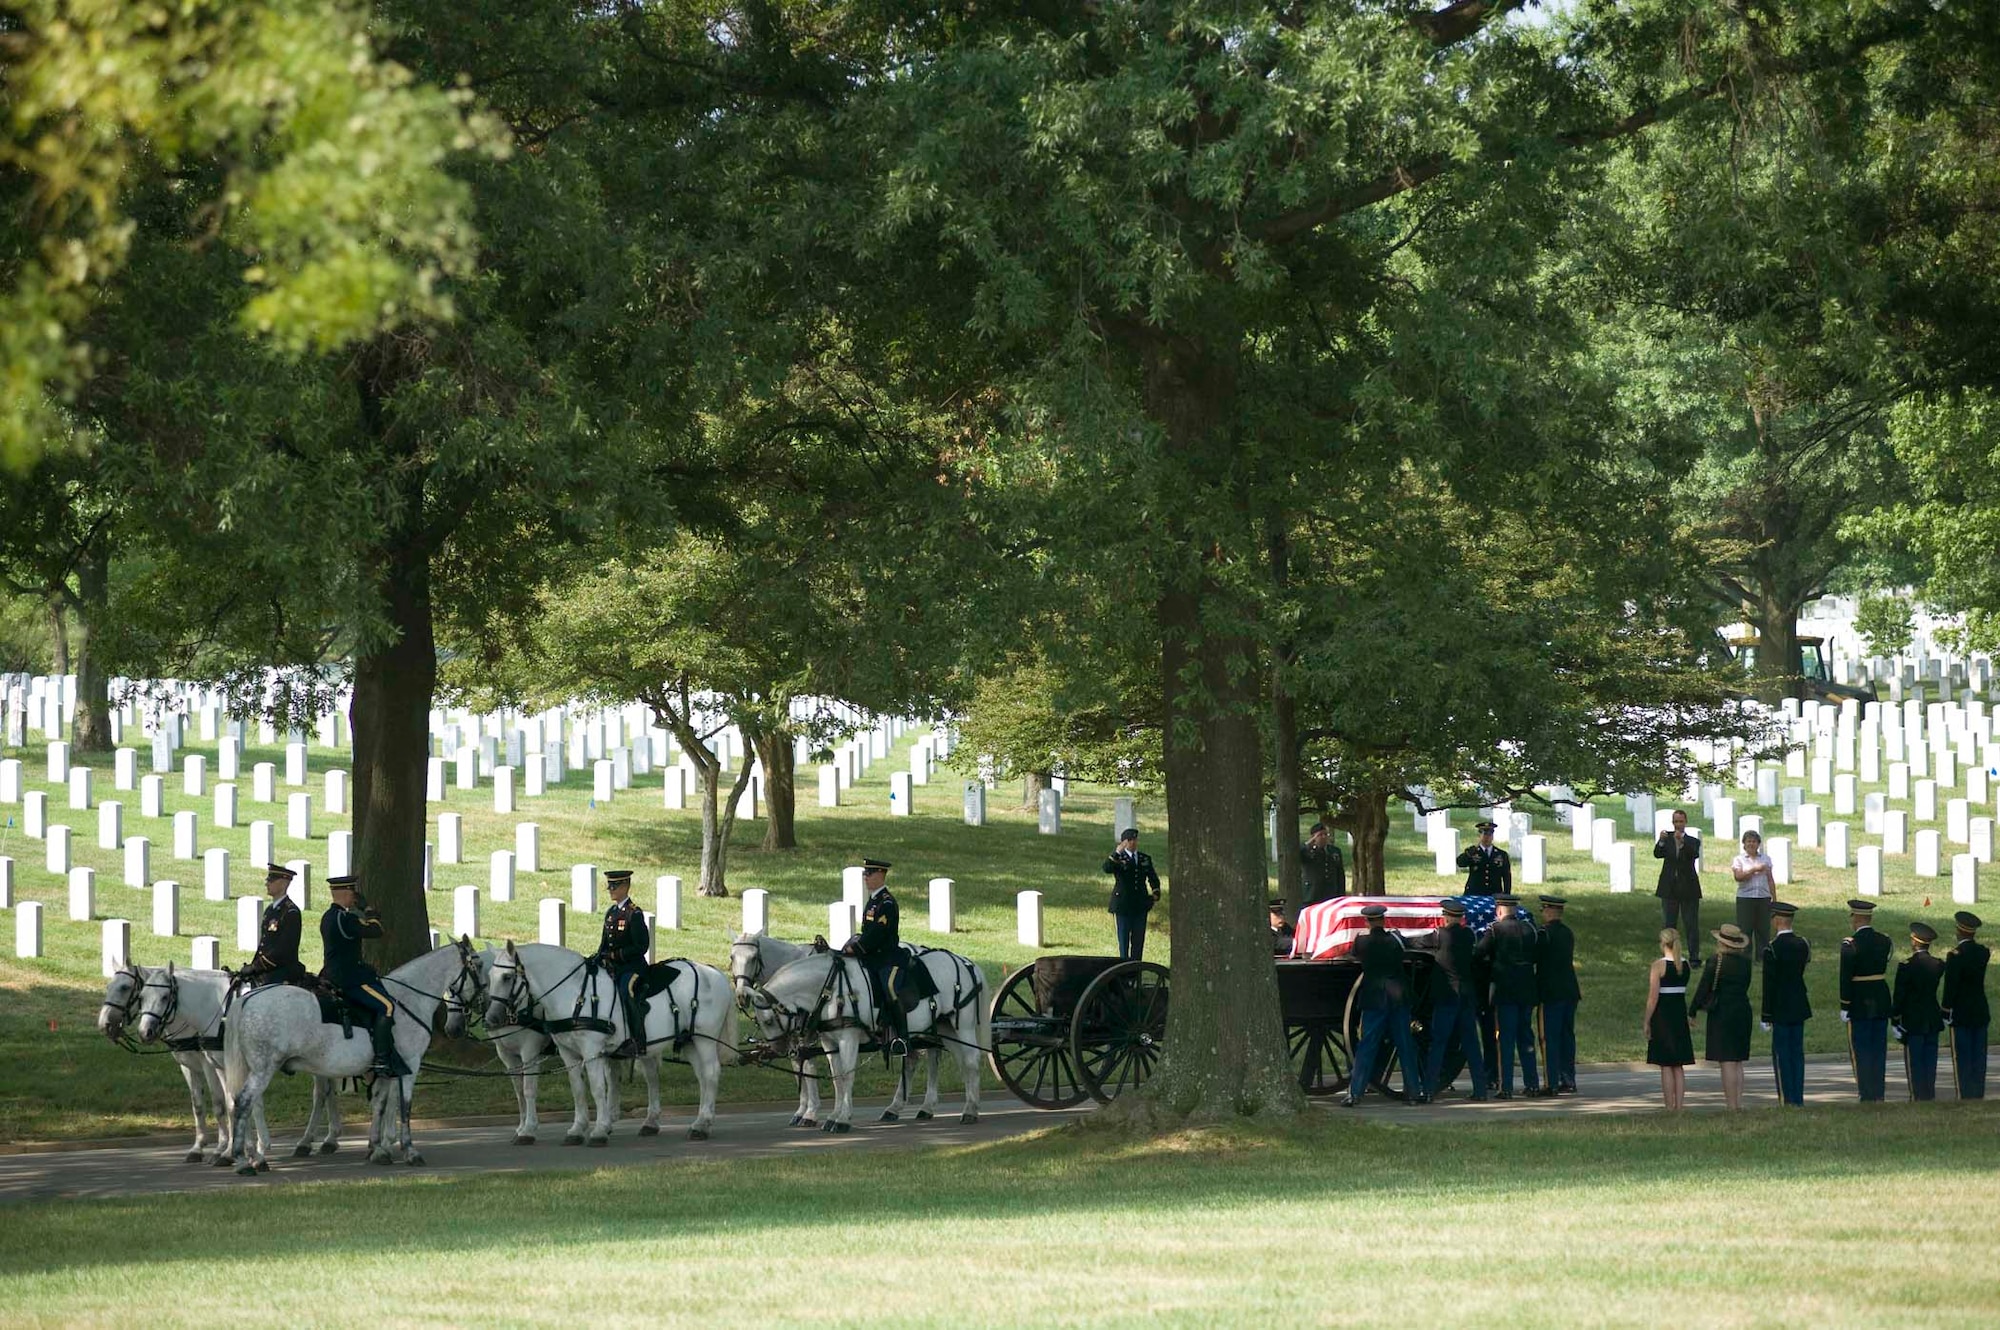 A casket containing the remains of six Airmen, who perished in 1944 in a C-47 aircraft crash in Burma, is removed from a horse-drawn caisson July 15, 2010 at Arlington National Cemetery, Va. The downed aircraft had a crew of seven - all of whom where interned here in two caskets following repatriation. (DOD photo/Michael Tolzmann)